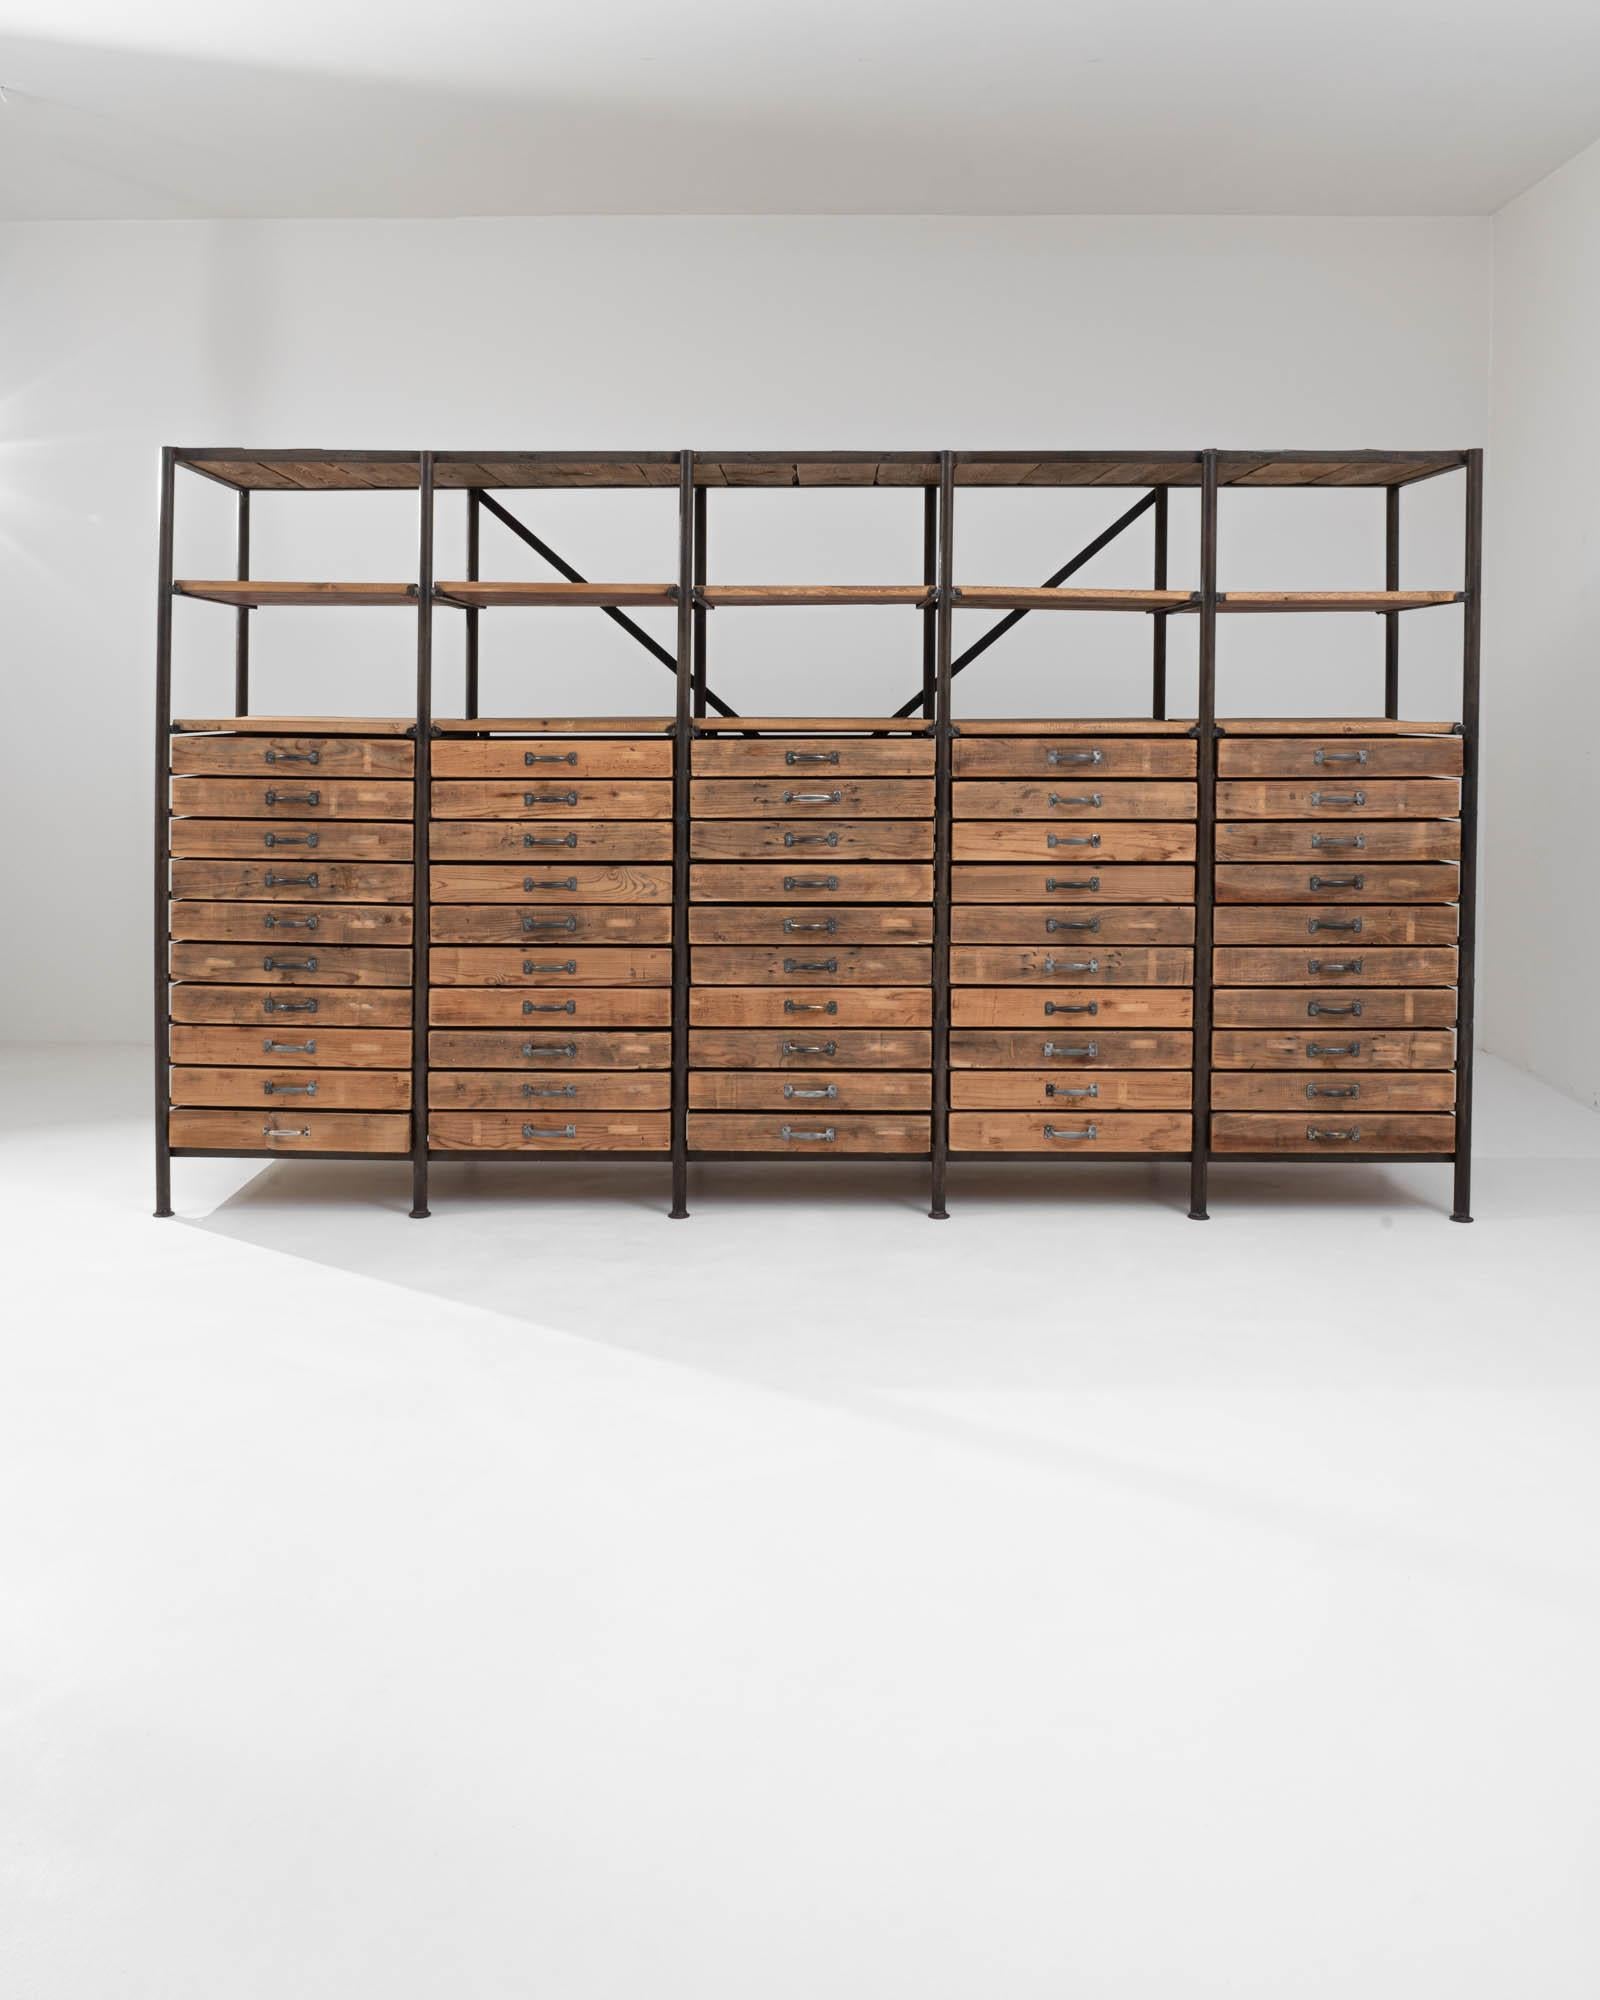 A wooden and metal shelving unit created in 20th century Central Europe. Five columns of ten drawers each stretch across the expansive composition of this delightful shelving unit. Weathered wood slotted into a welded steel frame creates a